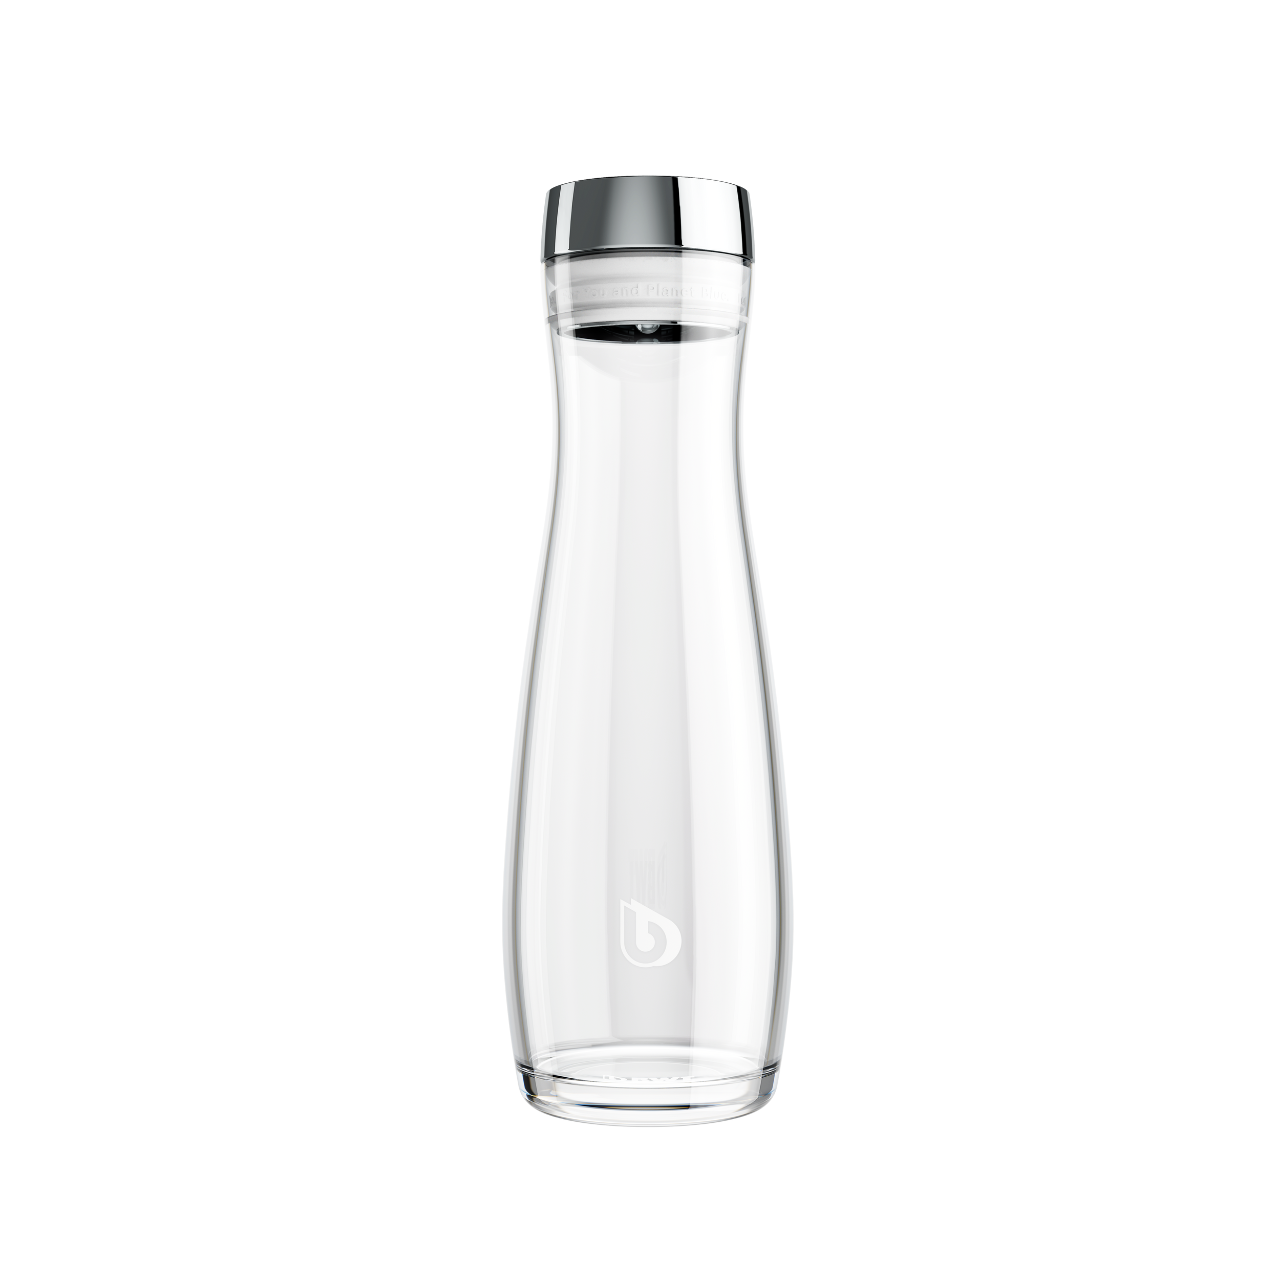 BWT Deluxe Glass Carafe 1.2L